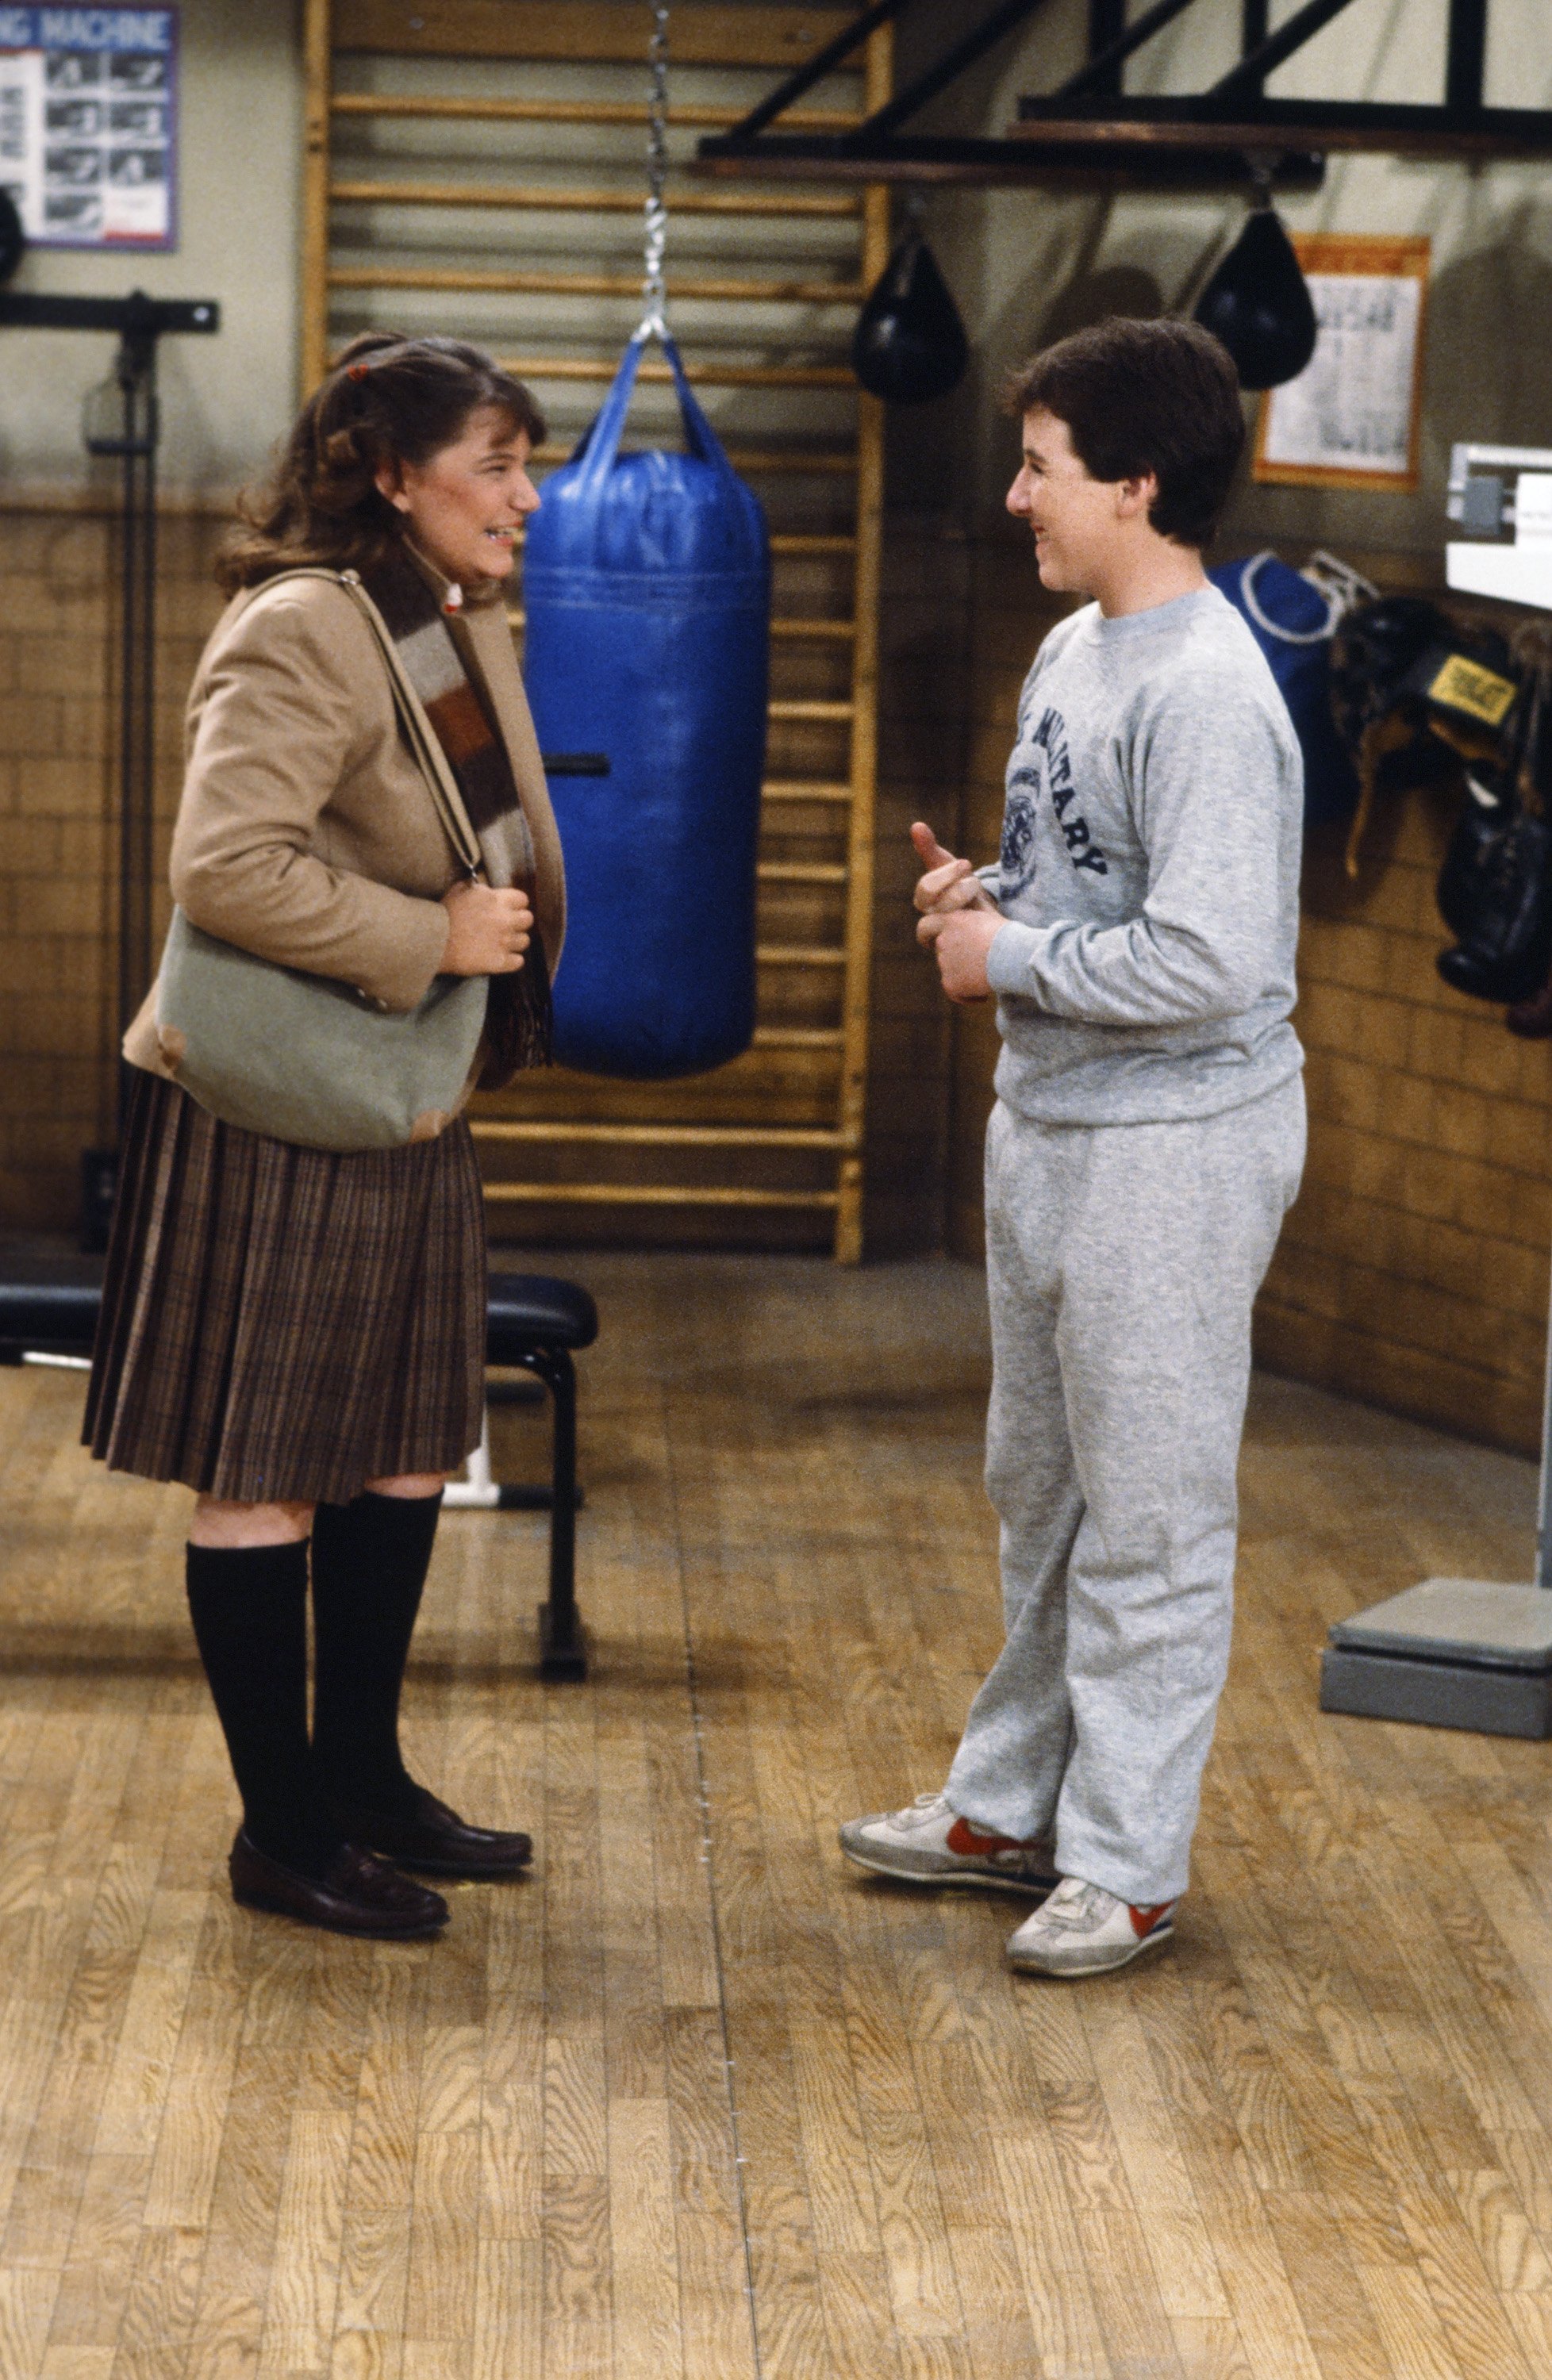 Still of Mindy Cohn and John P. Navin Jr. in The Facts of Life (1979)